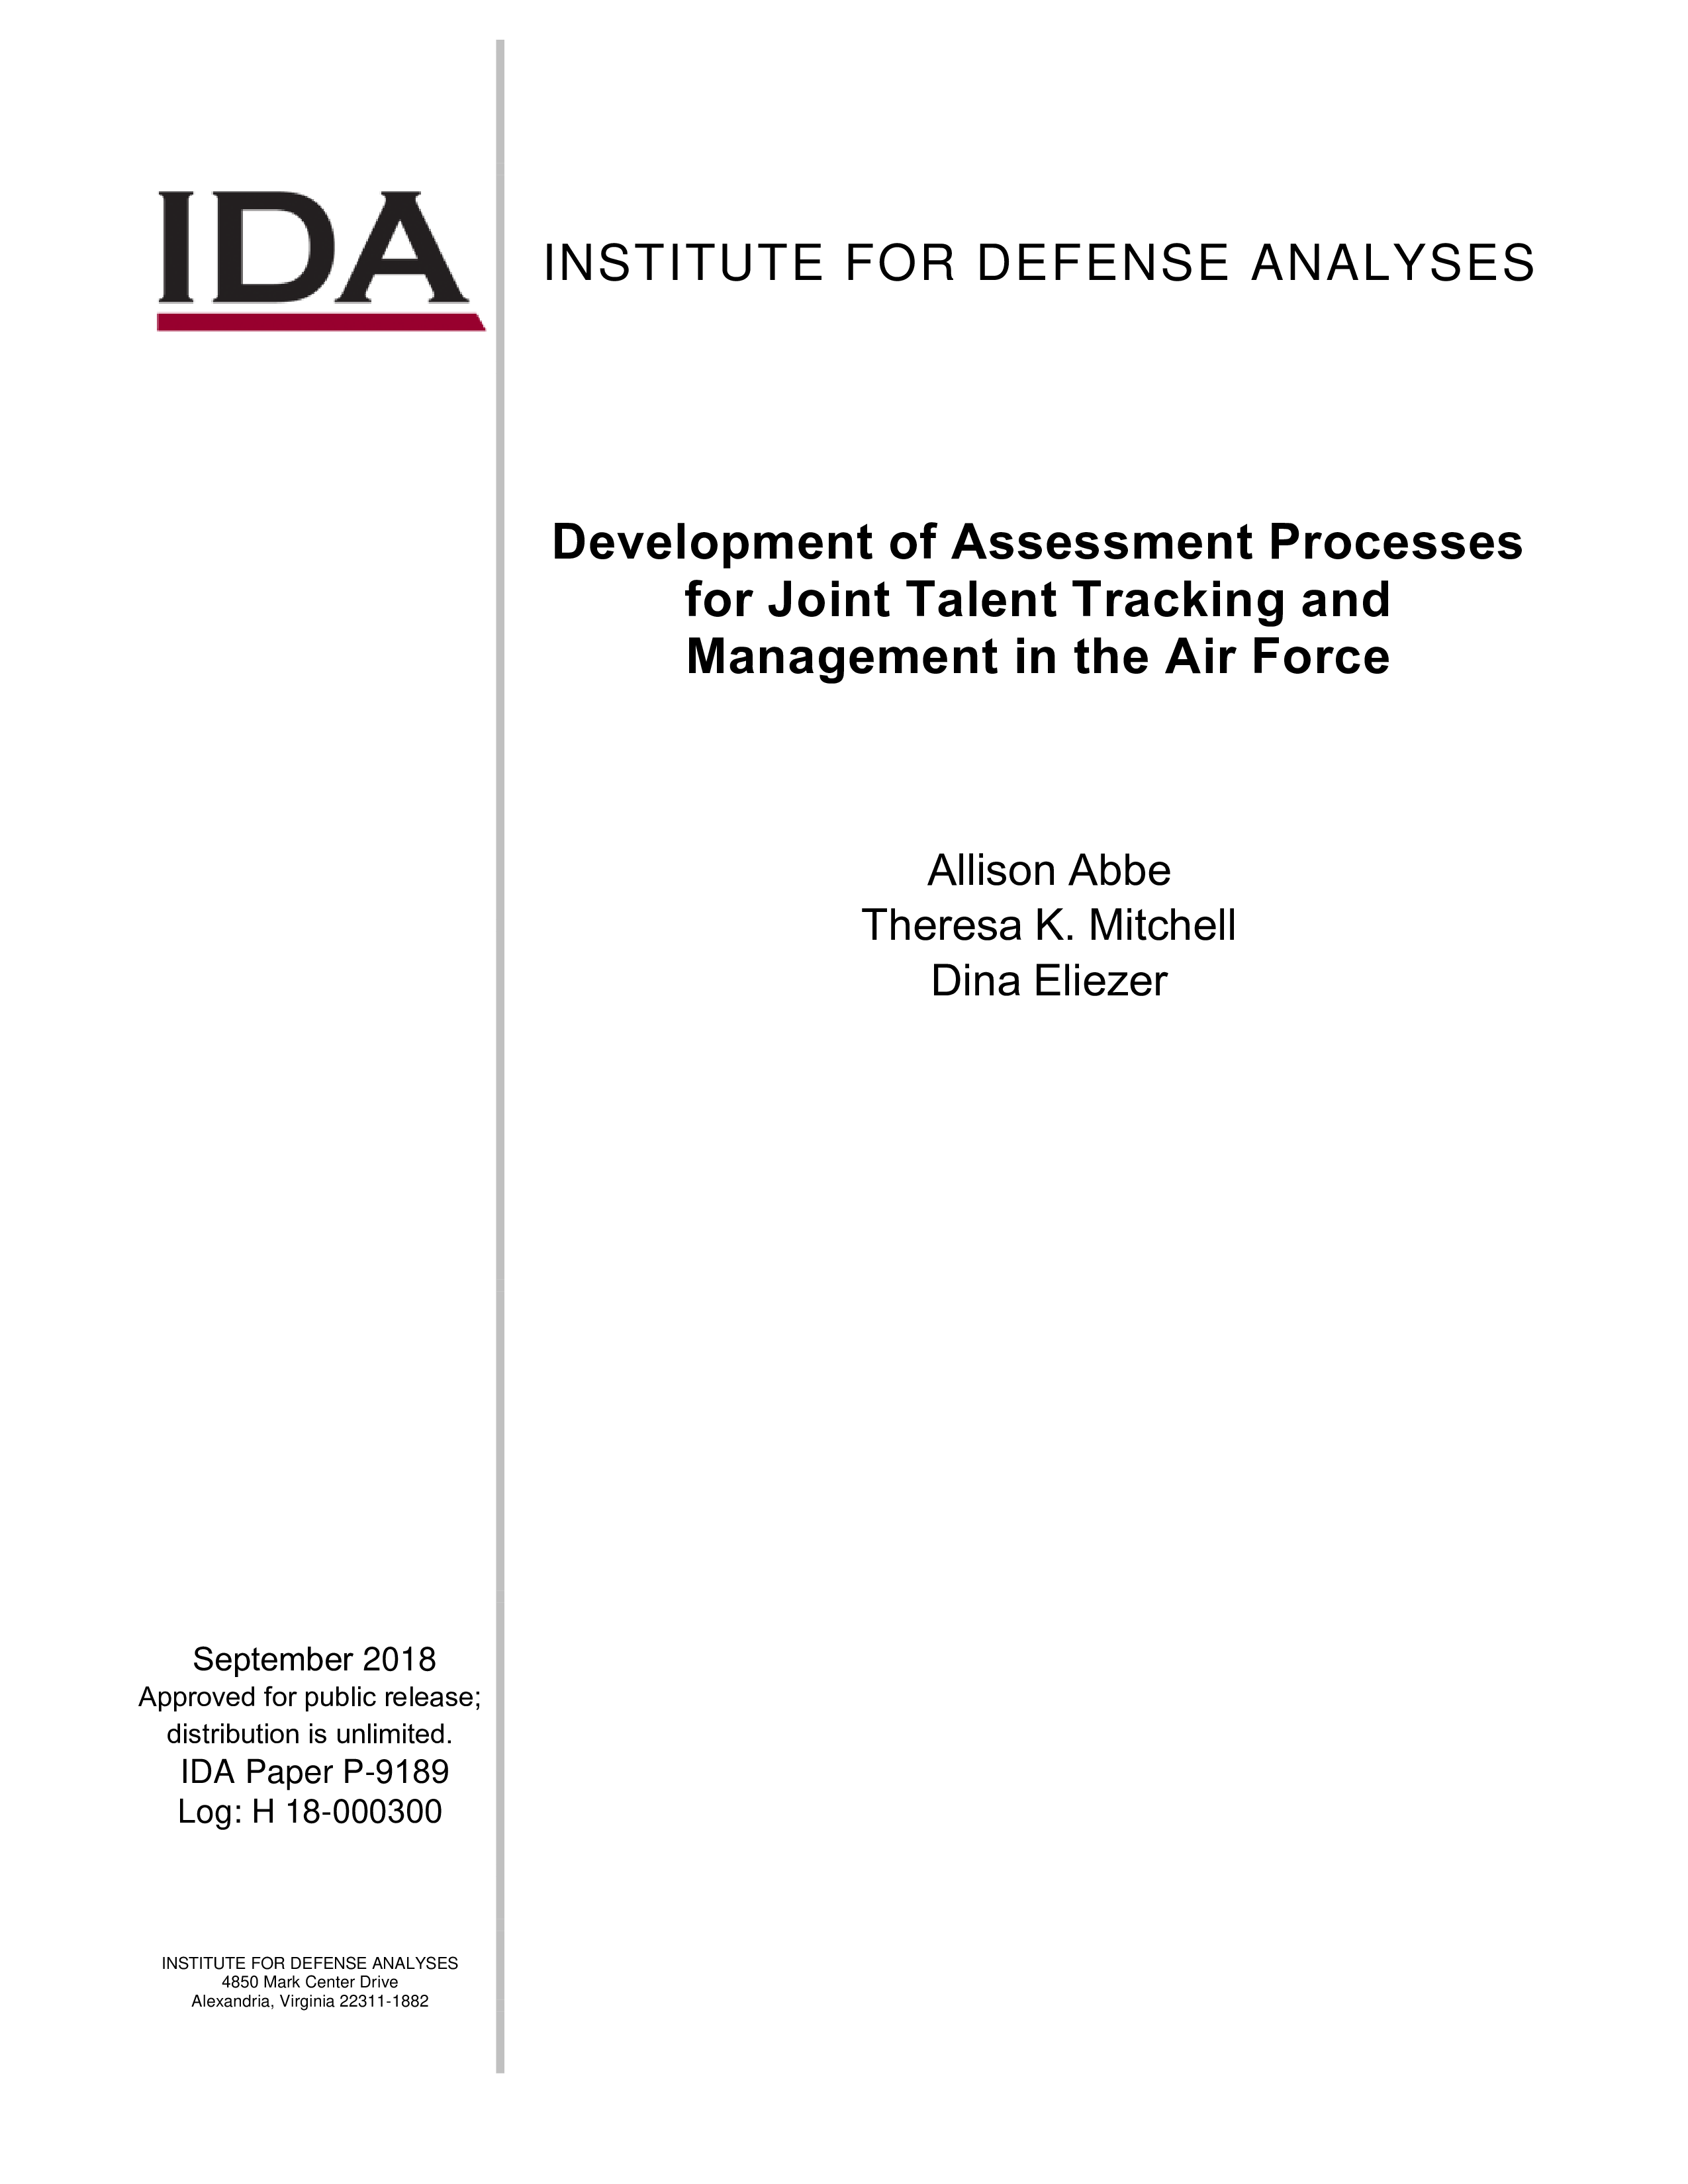 Development of Assessment Processes for Joint Talent Tracking and Management in the Air Force